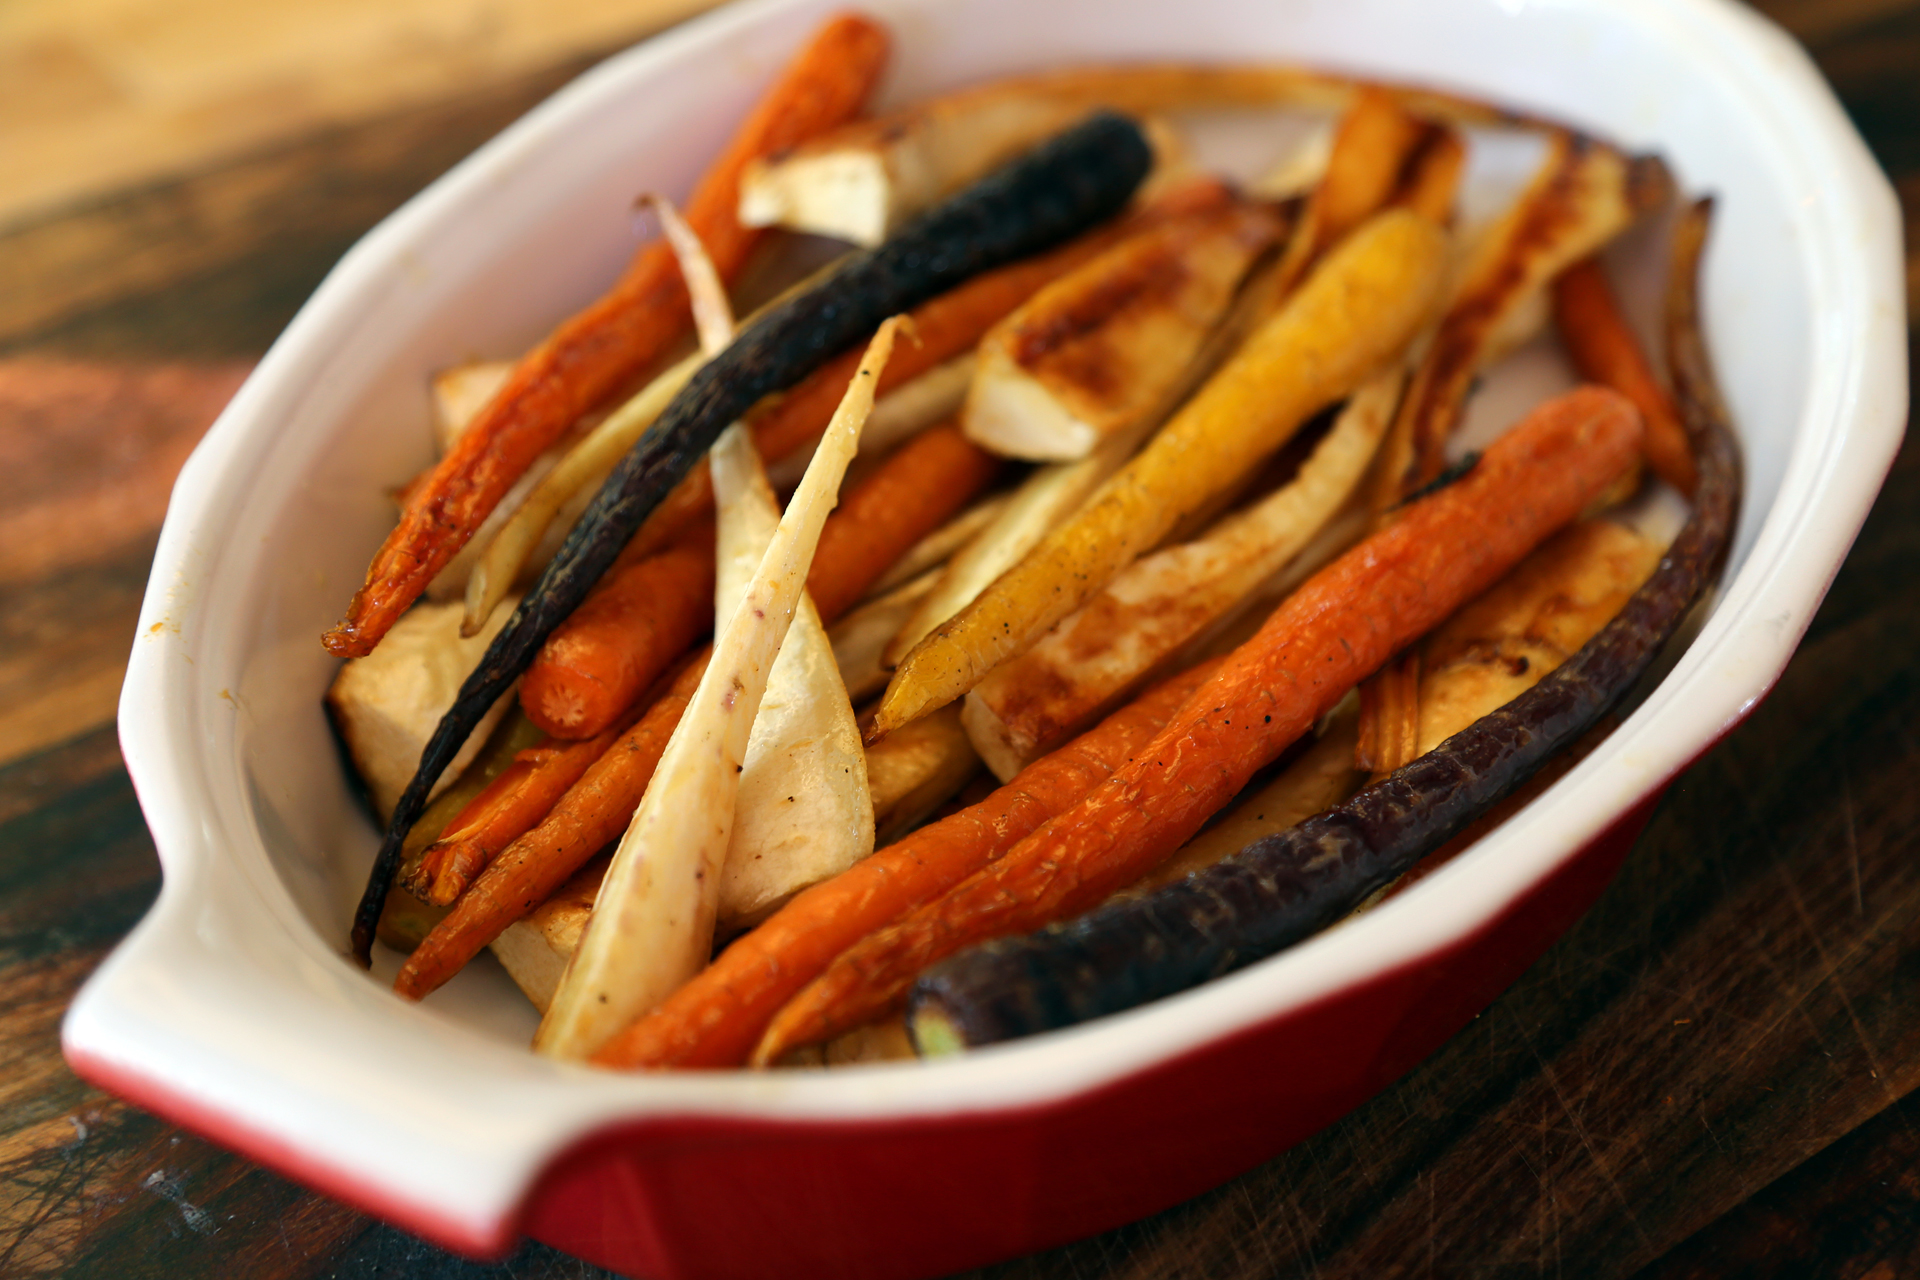 Serve the Honey-Roasted Carrots and Parsnips right away.